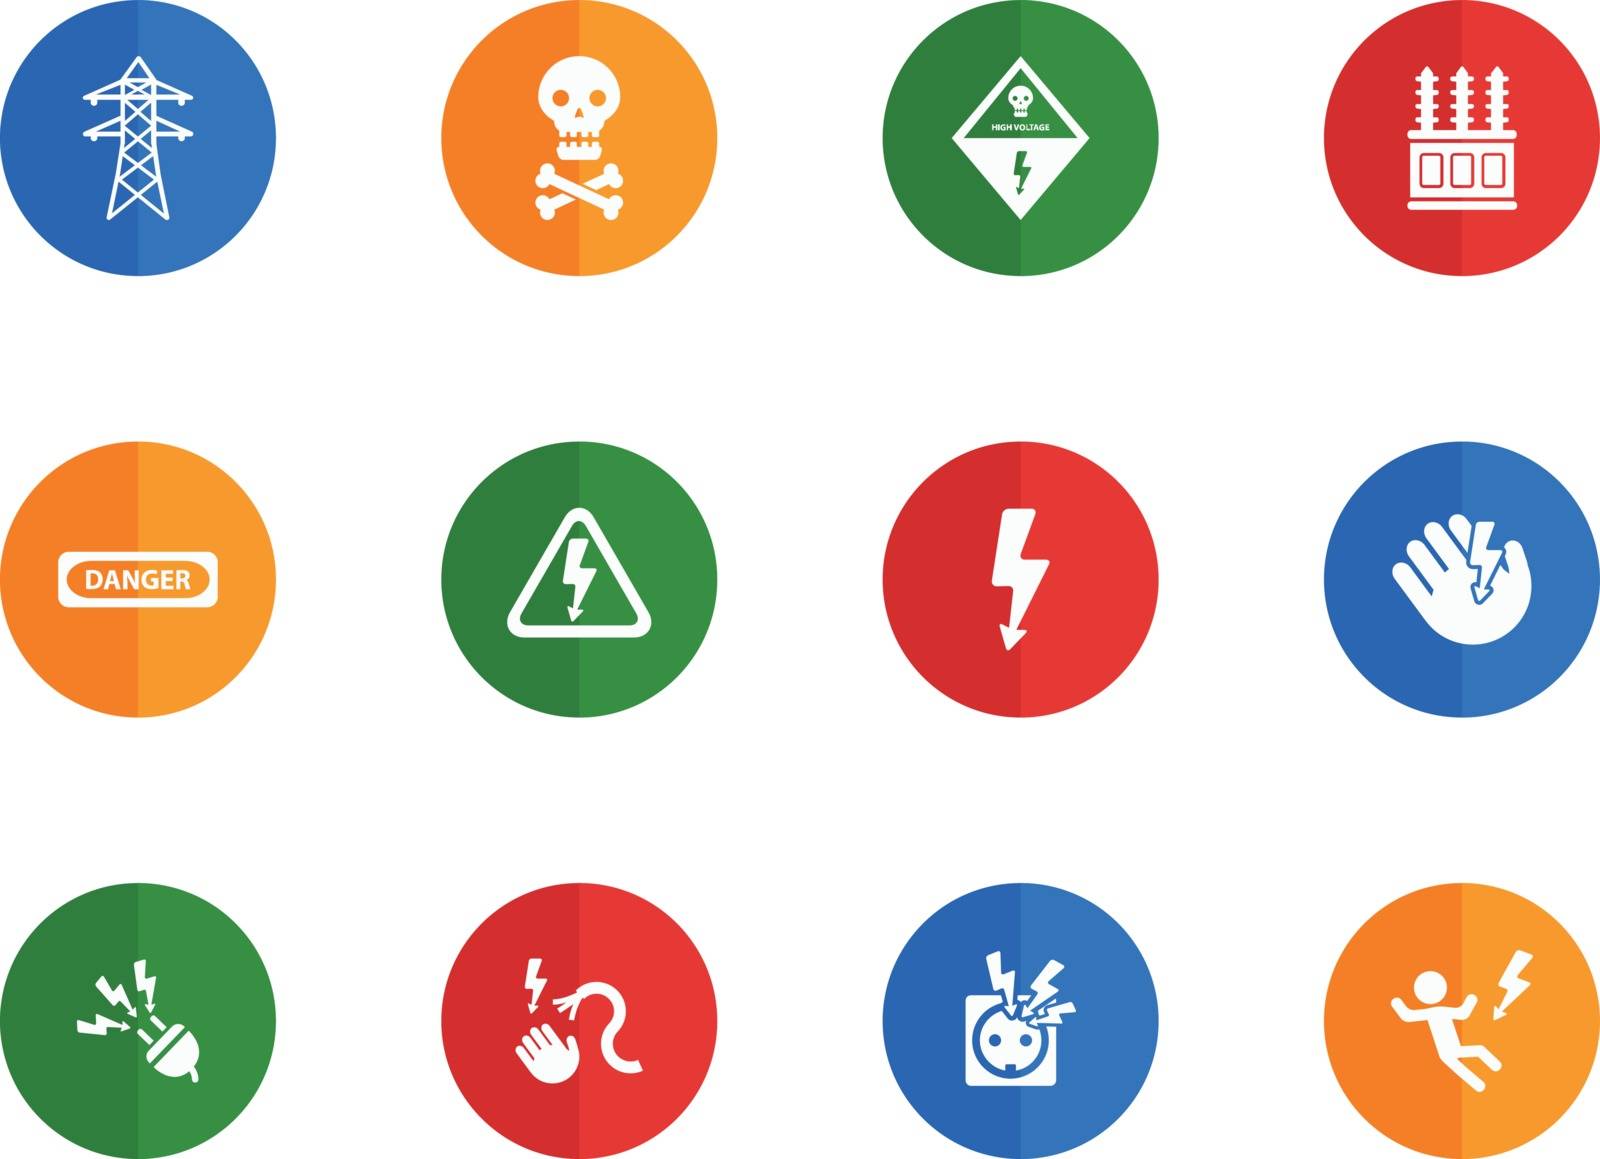 High voltage simply icons by ayax